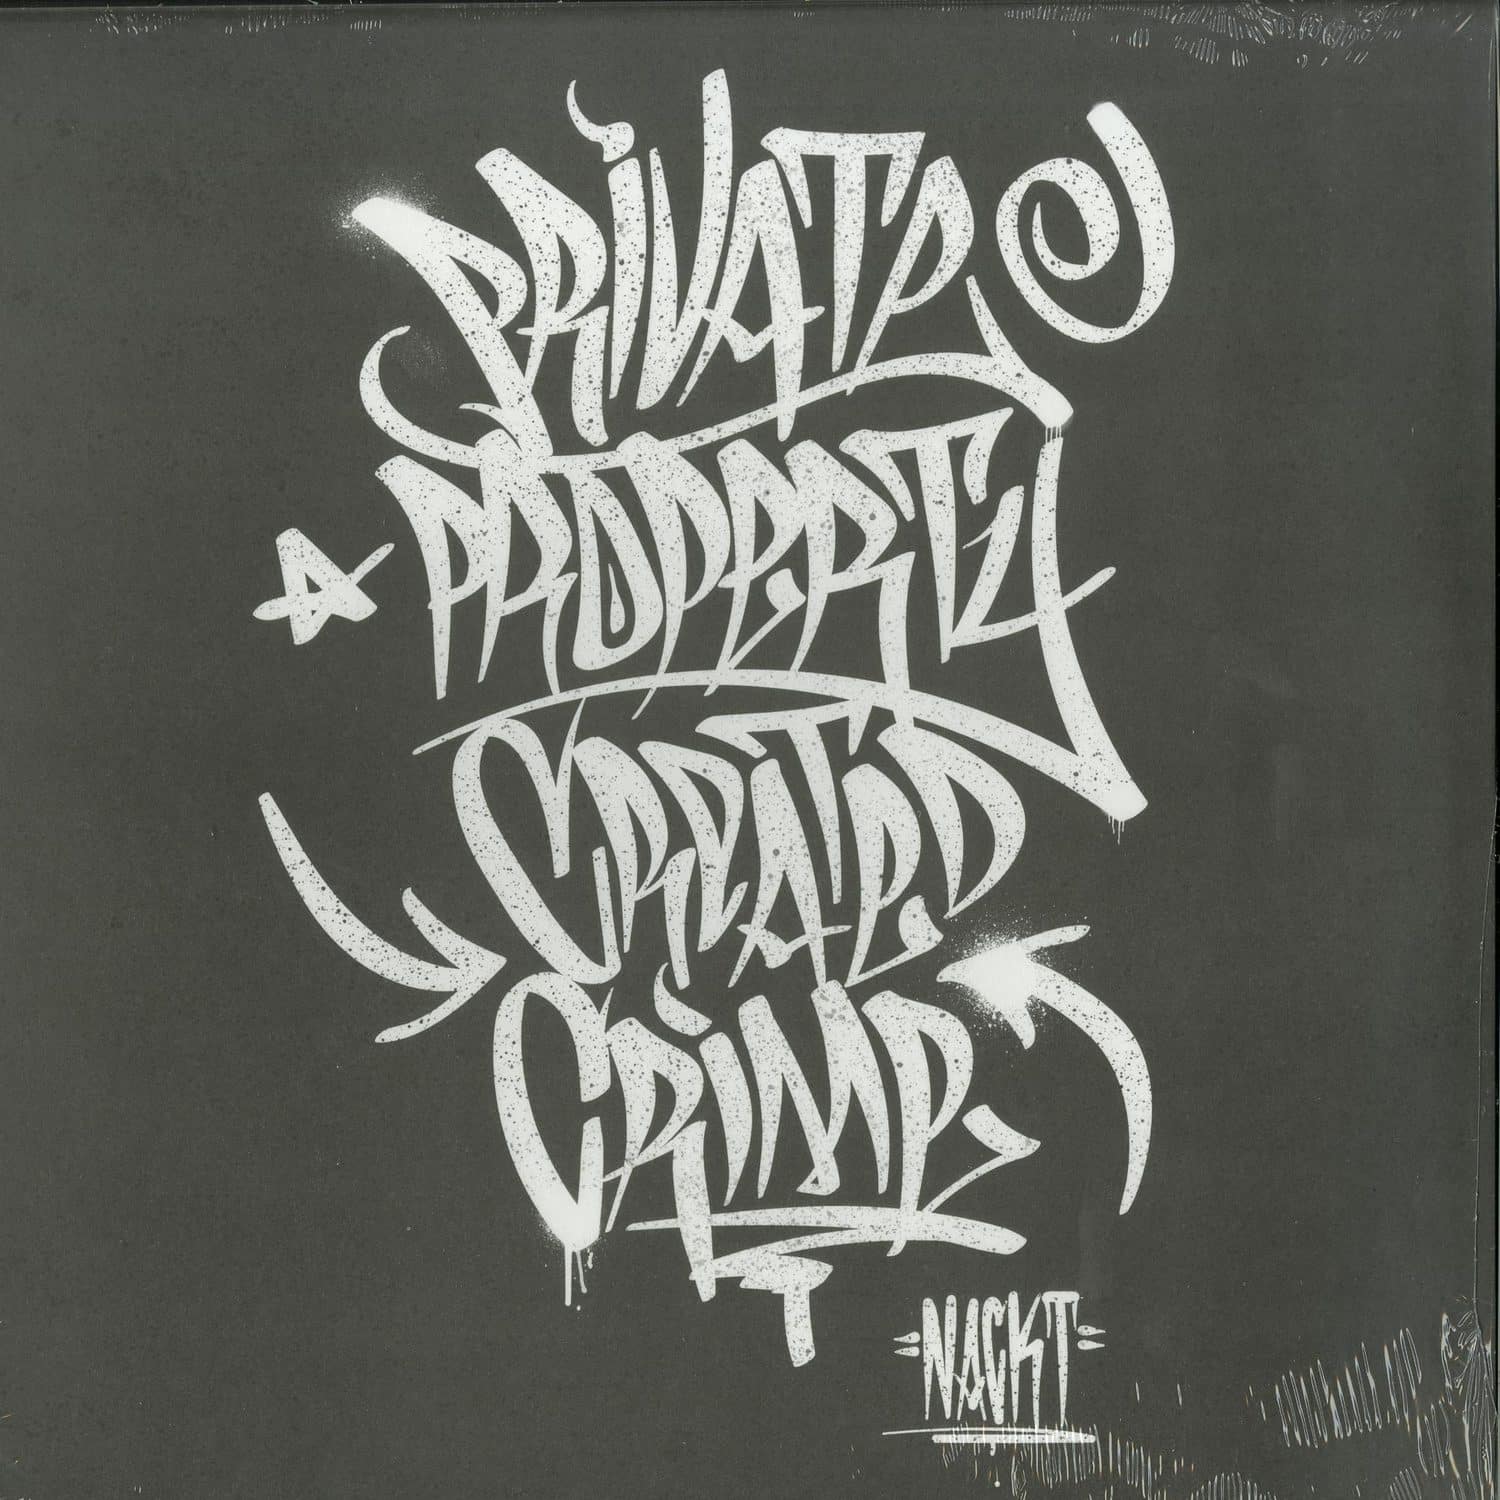 Nackt - PRIVATE PROPERTY CREATED CRIME